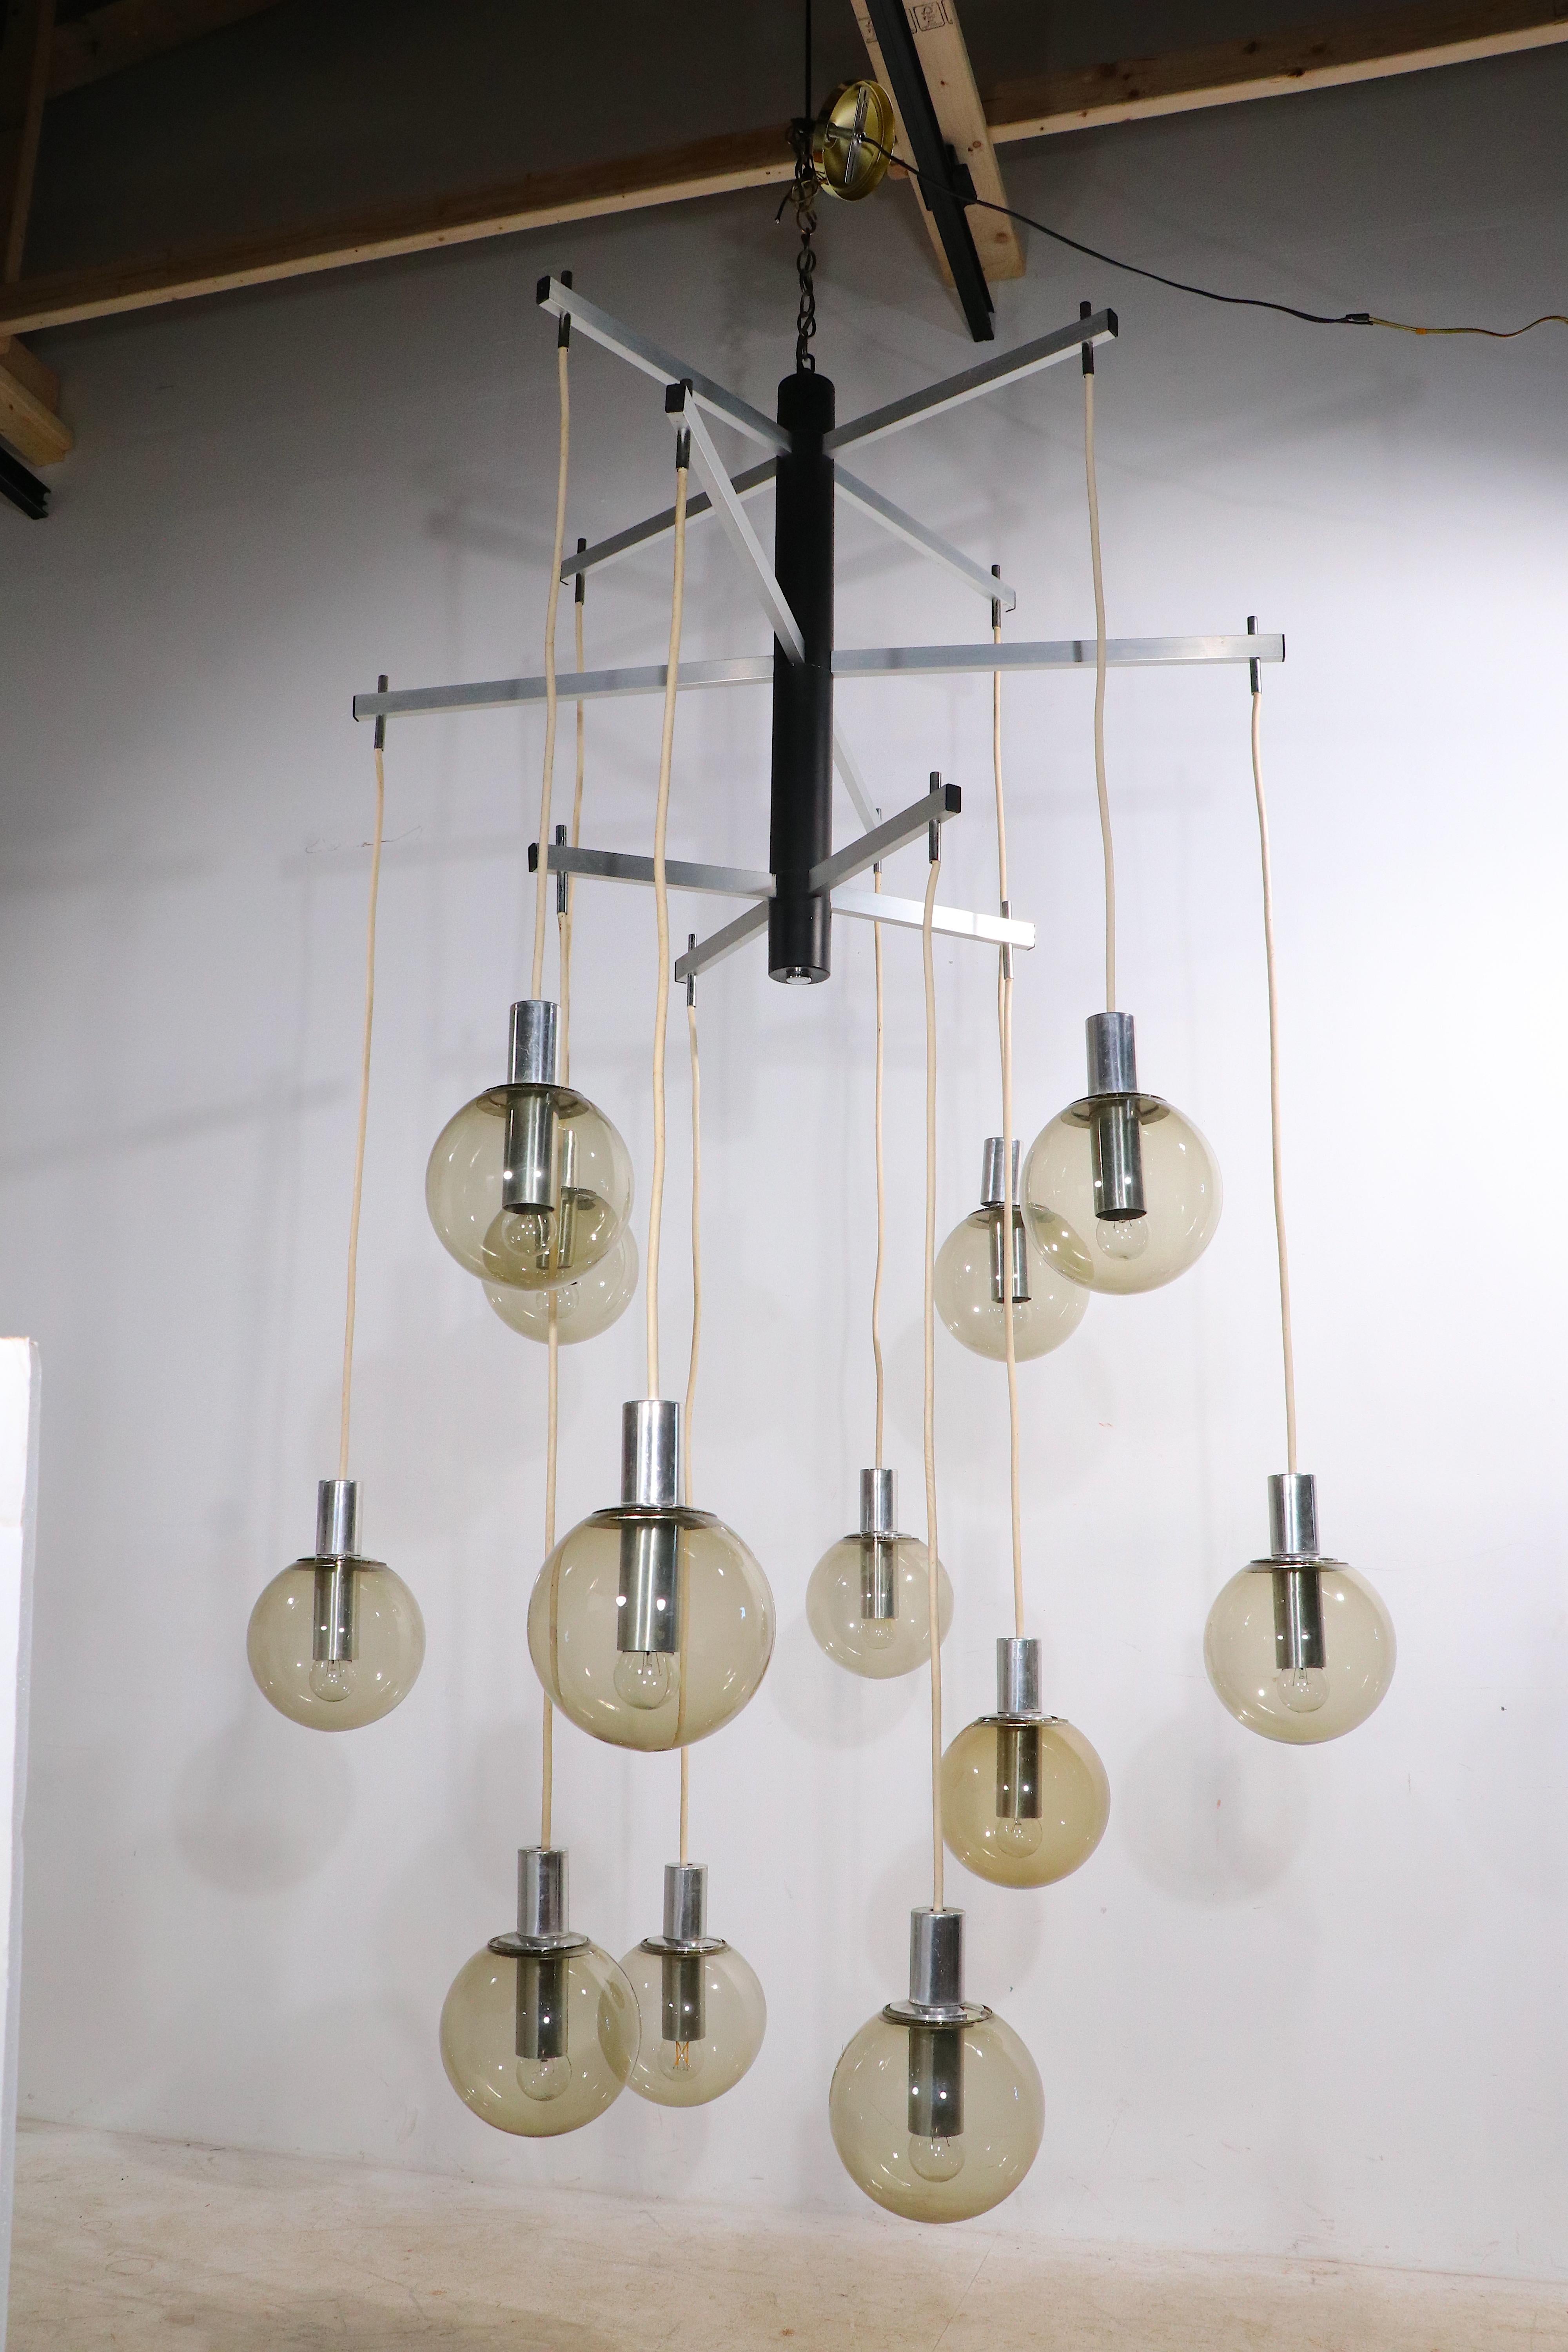 Large Modernist 12 Light Chandelier with Tinted Glass Ball Shades Ca. 1970's For Sale 1